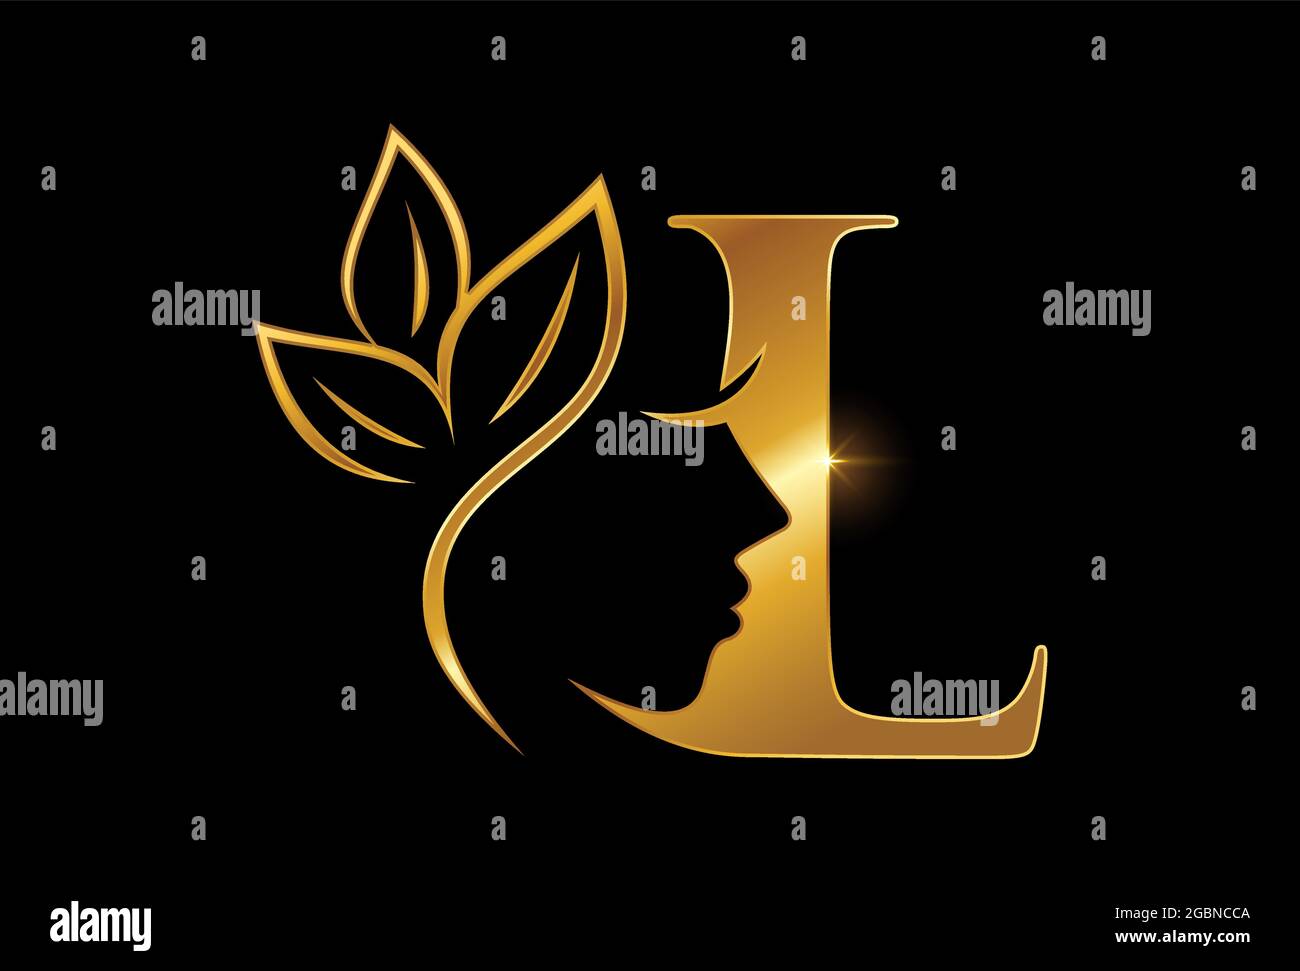 Premium Vector  Gold logo with the letter l on a black background